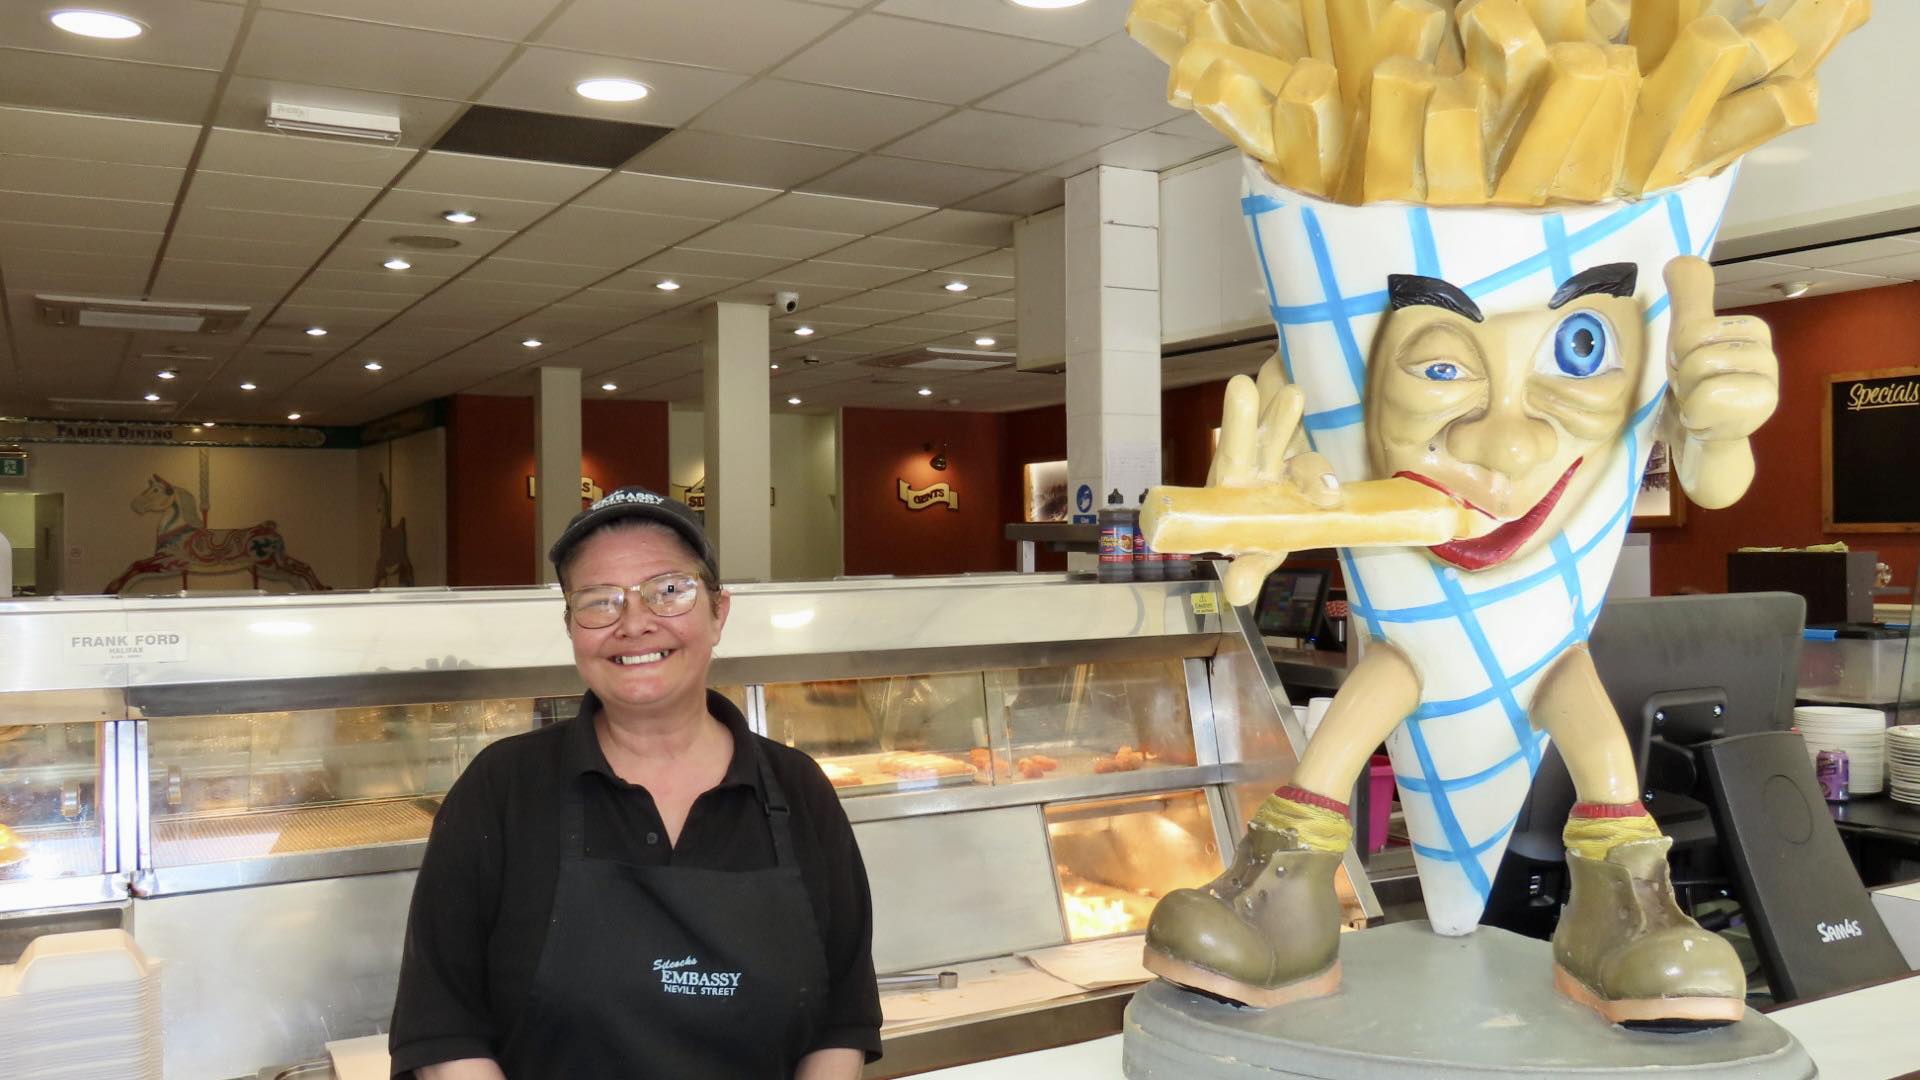 Silcock's Embassy Restaurant on Nevill Street in Southport is celebrating National Fish and Chip Day. Photo by Andrew Brown of Stand Up For Southport